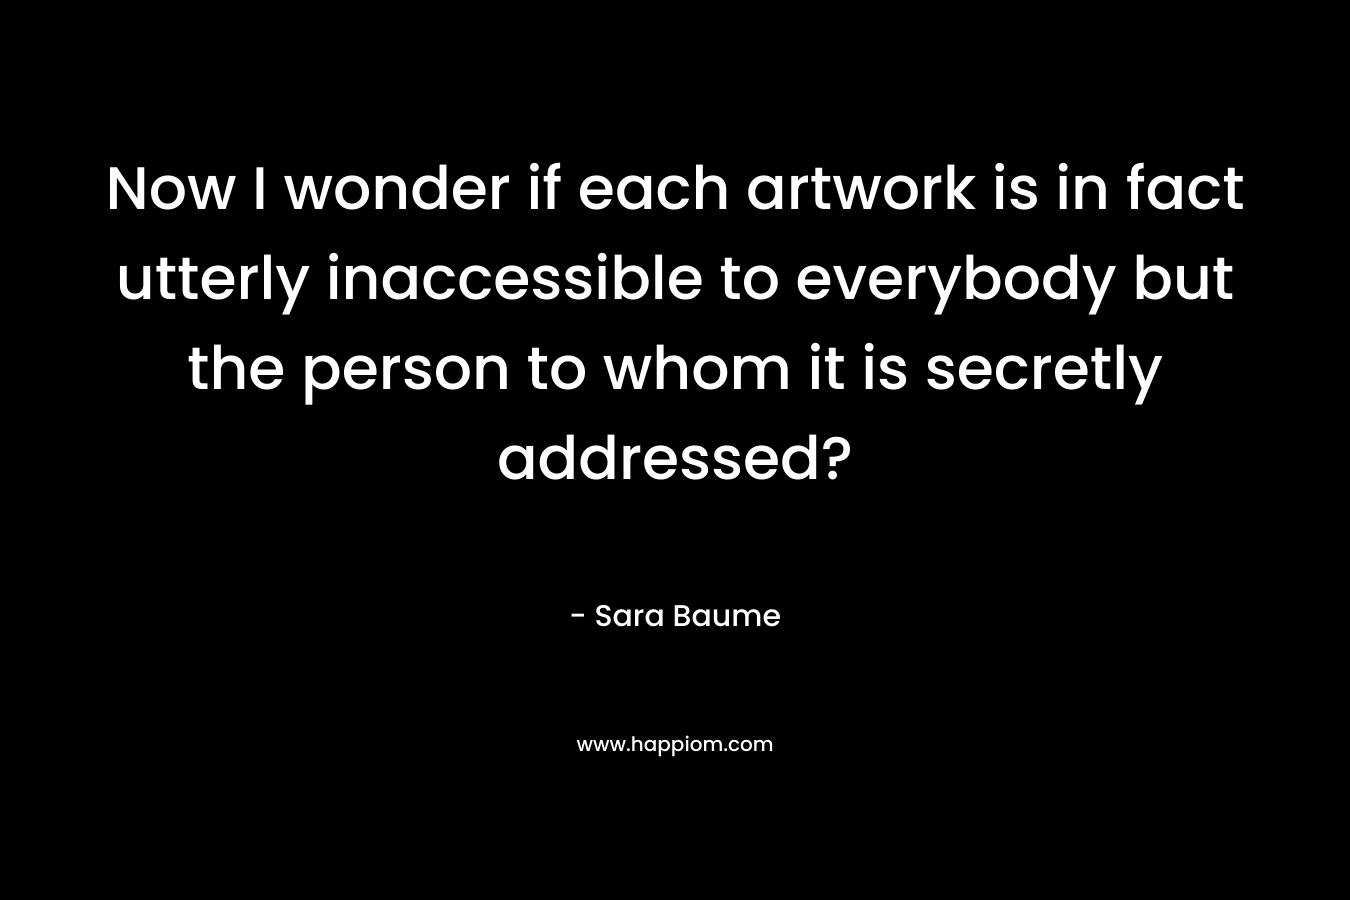 Now I wonder if each artwork is in fact utterly inaccessible to everybody but the person to whom it is secretly addressed? – Sara Baume